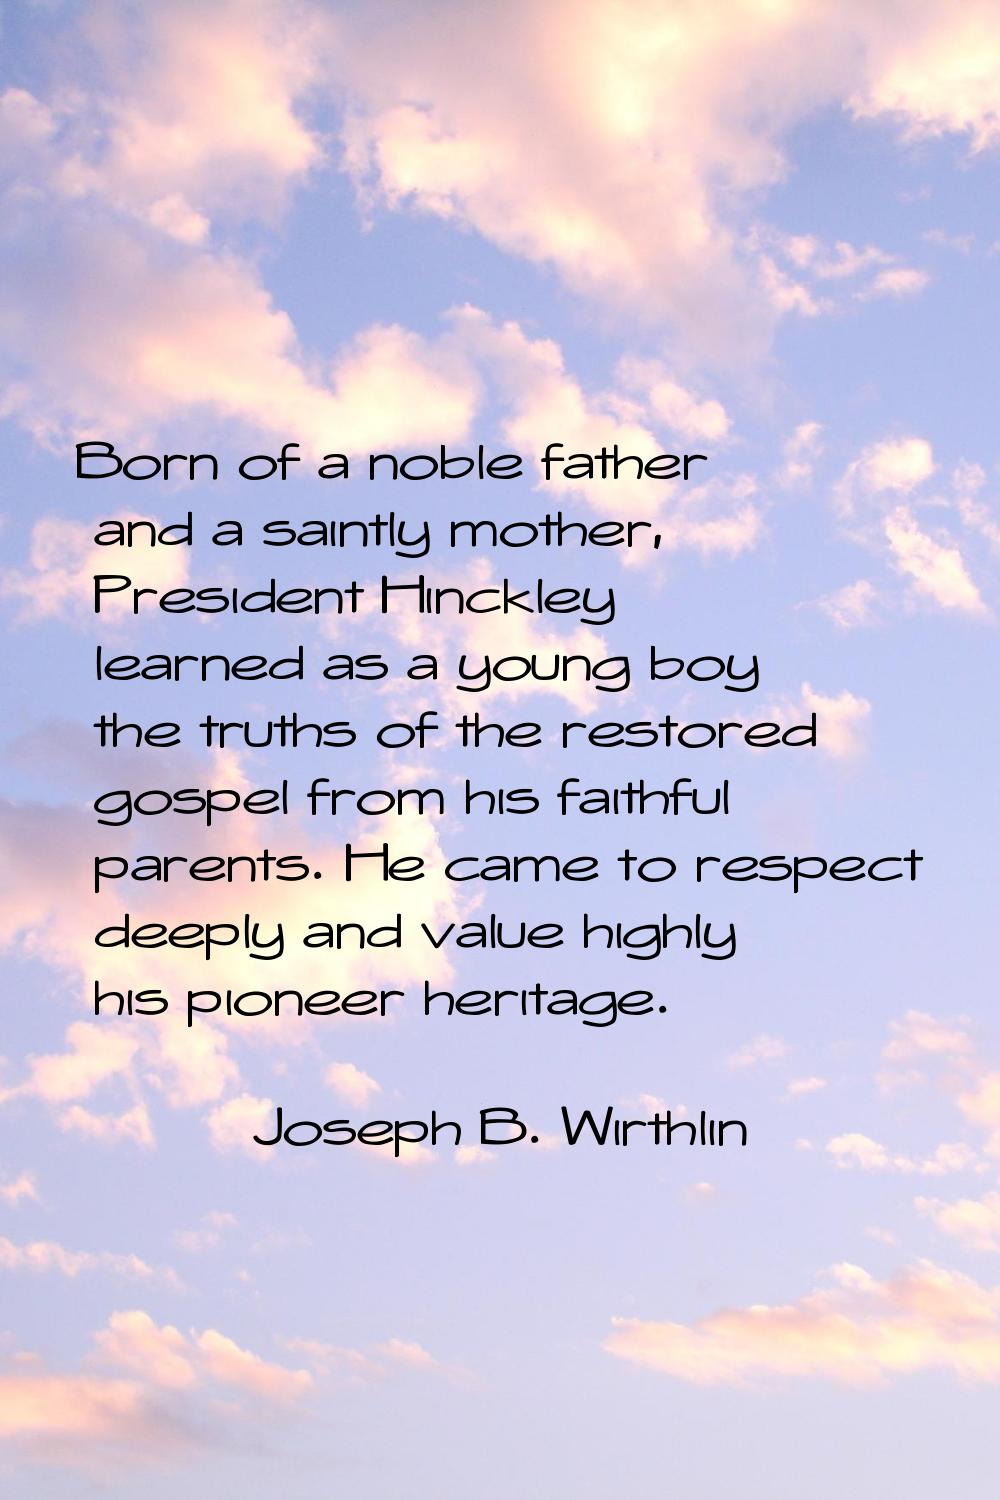 Born of a noble father and a saintly mother, President Hinckley learned as a young boy the truths o